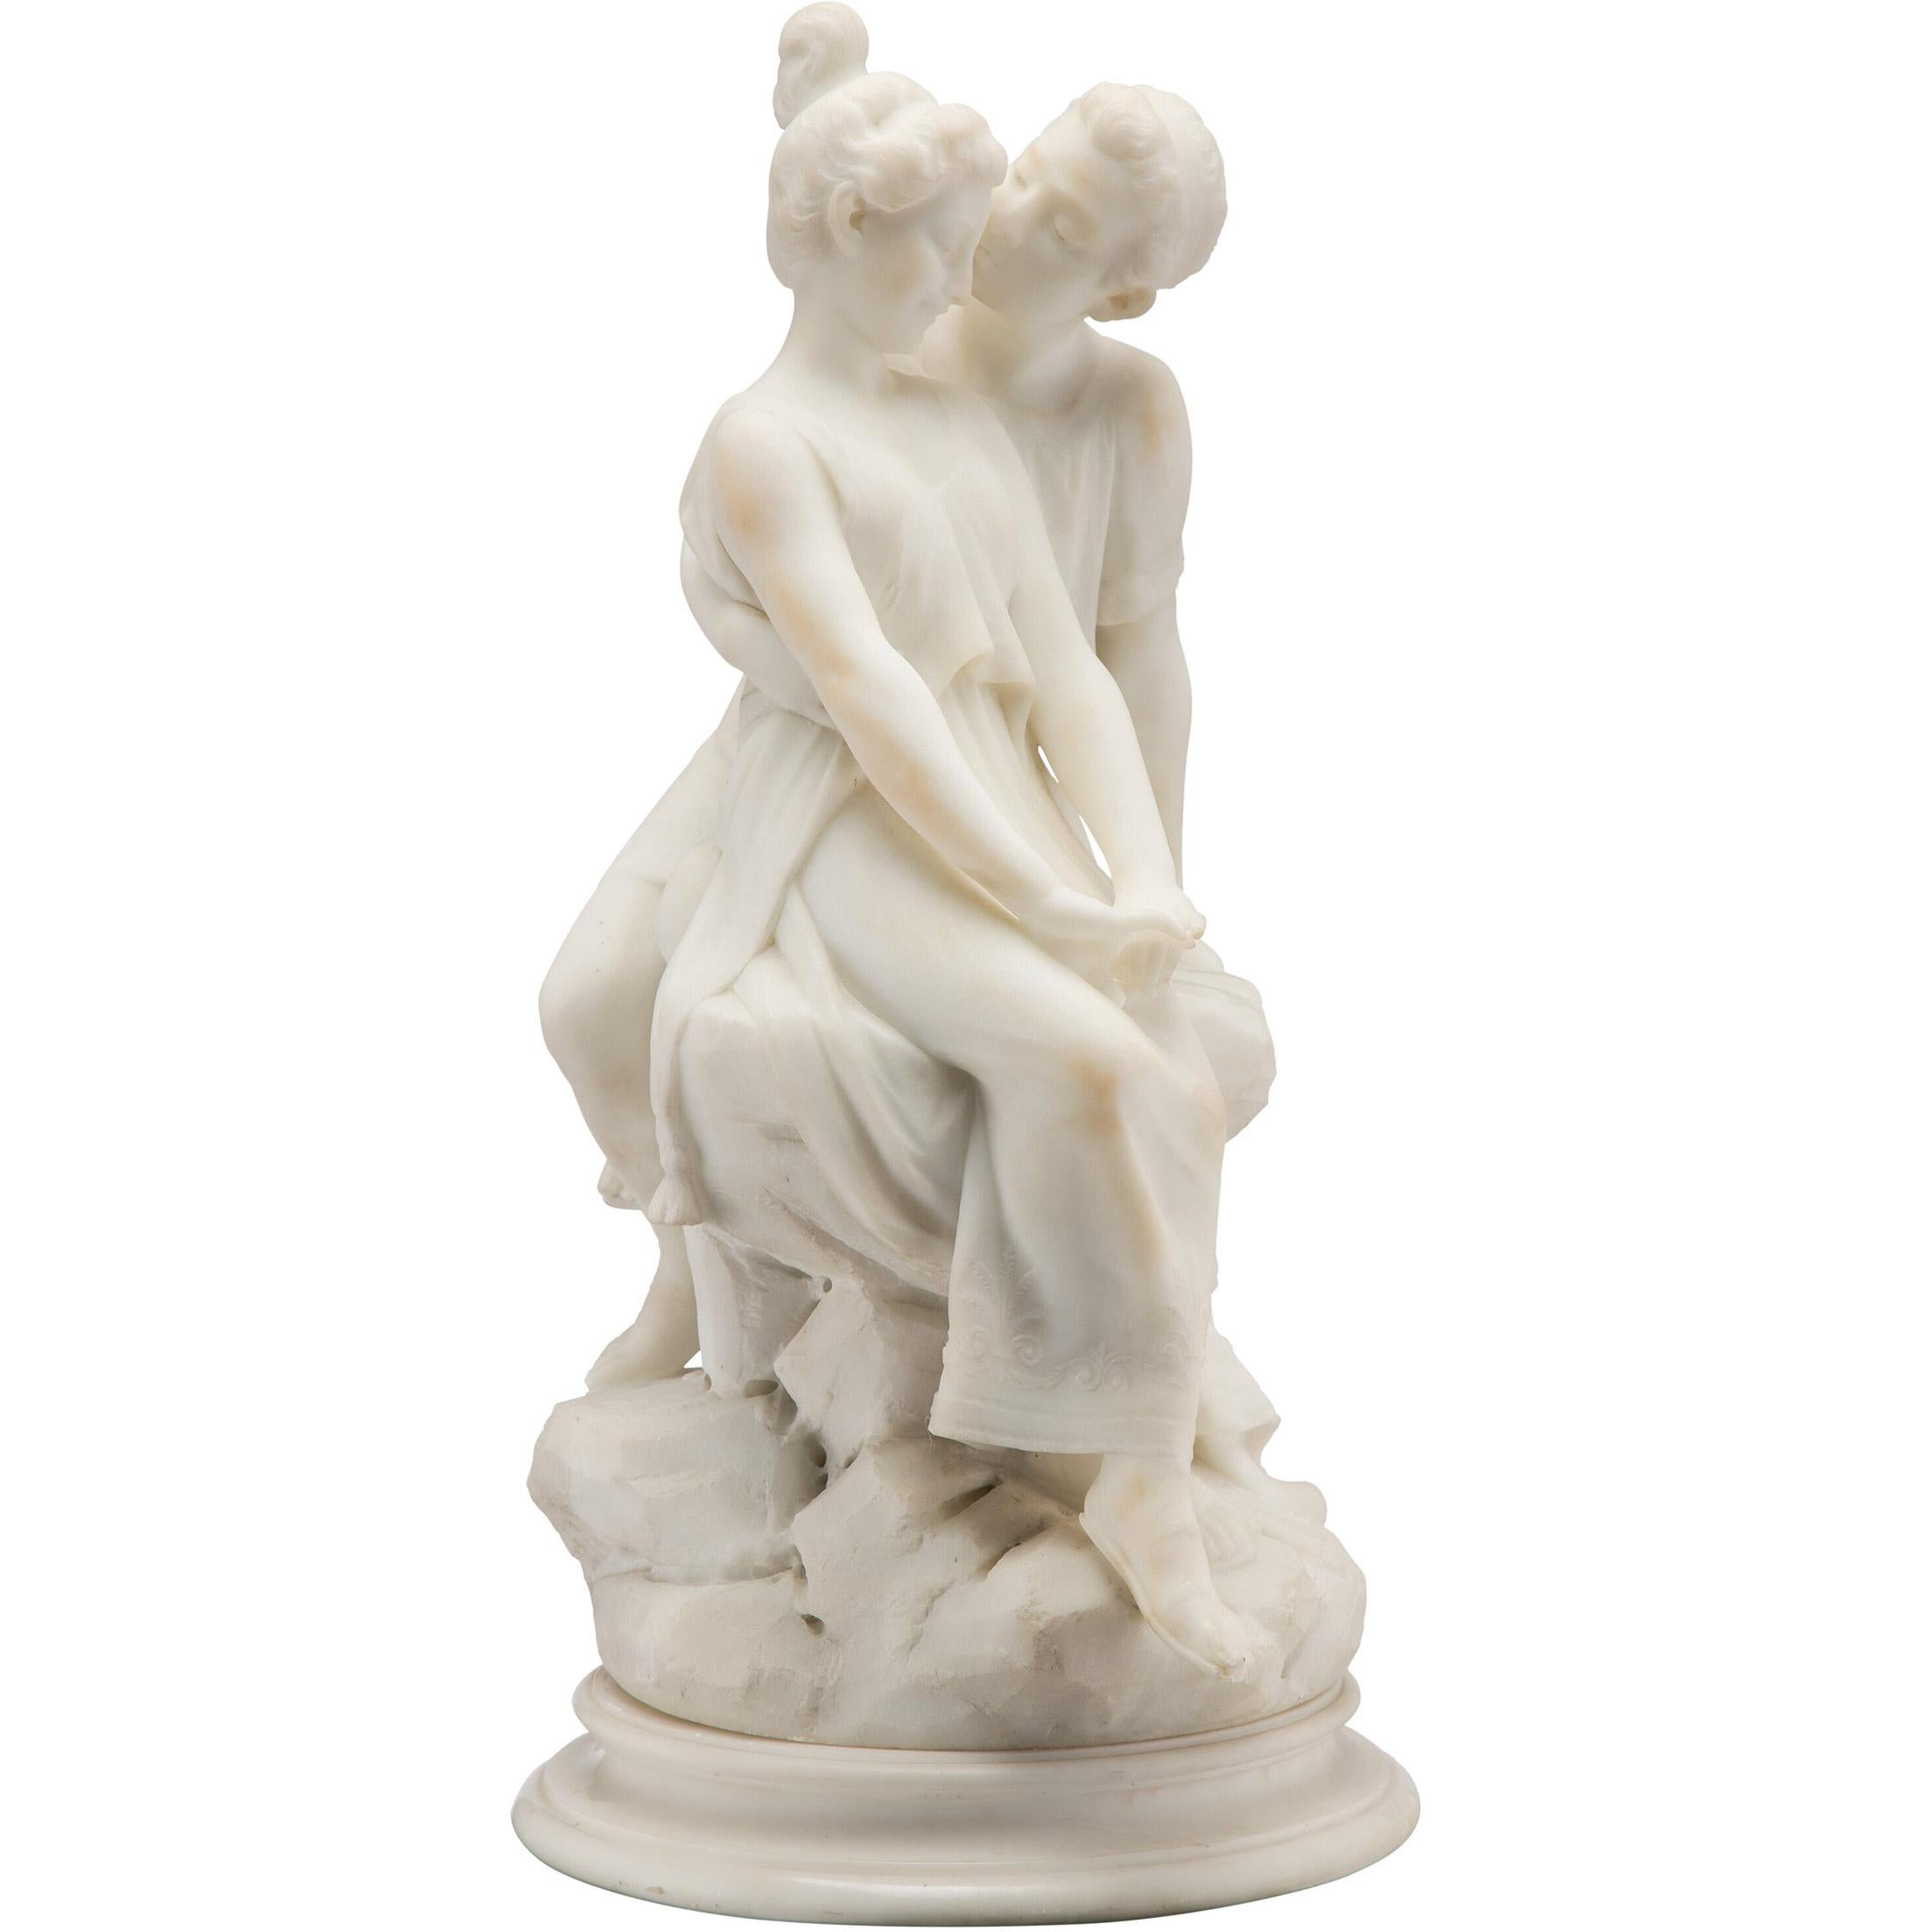 The finely casted Italian white marble sculpture of lovers surmounted on a round marble base signed ‘F. Vichi, FIRENZE.’

Title: Lovers
Artist: Ferdinando Vichi (Italian, 1875-1945)
Date: 19th century
Dimension: Sculpture: 22 1/2 in. high,